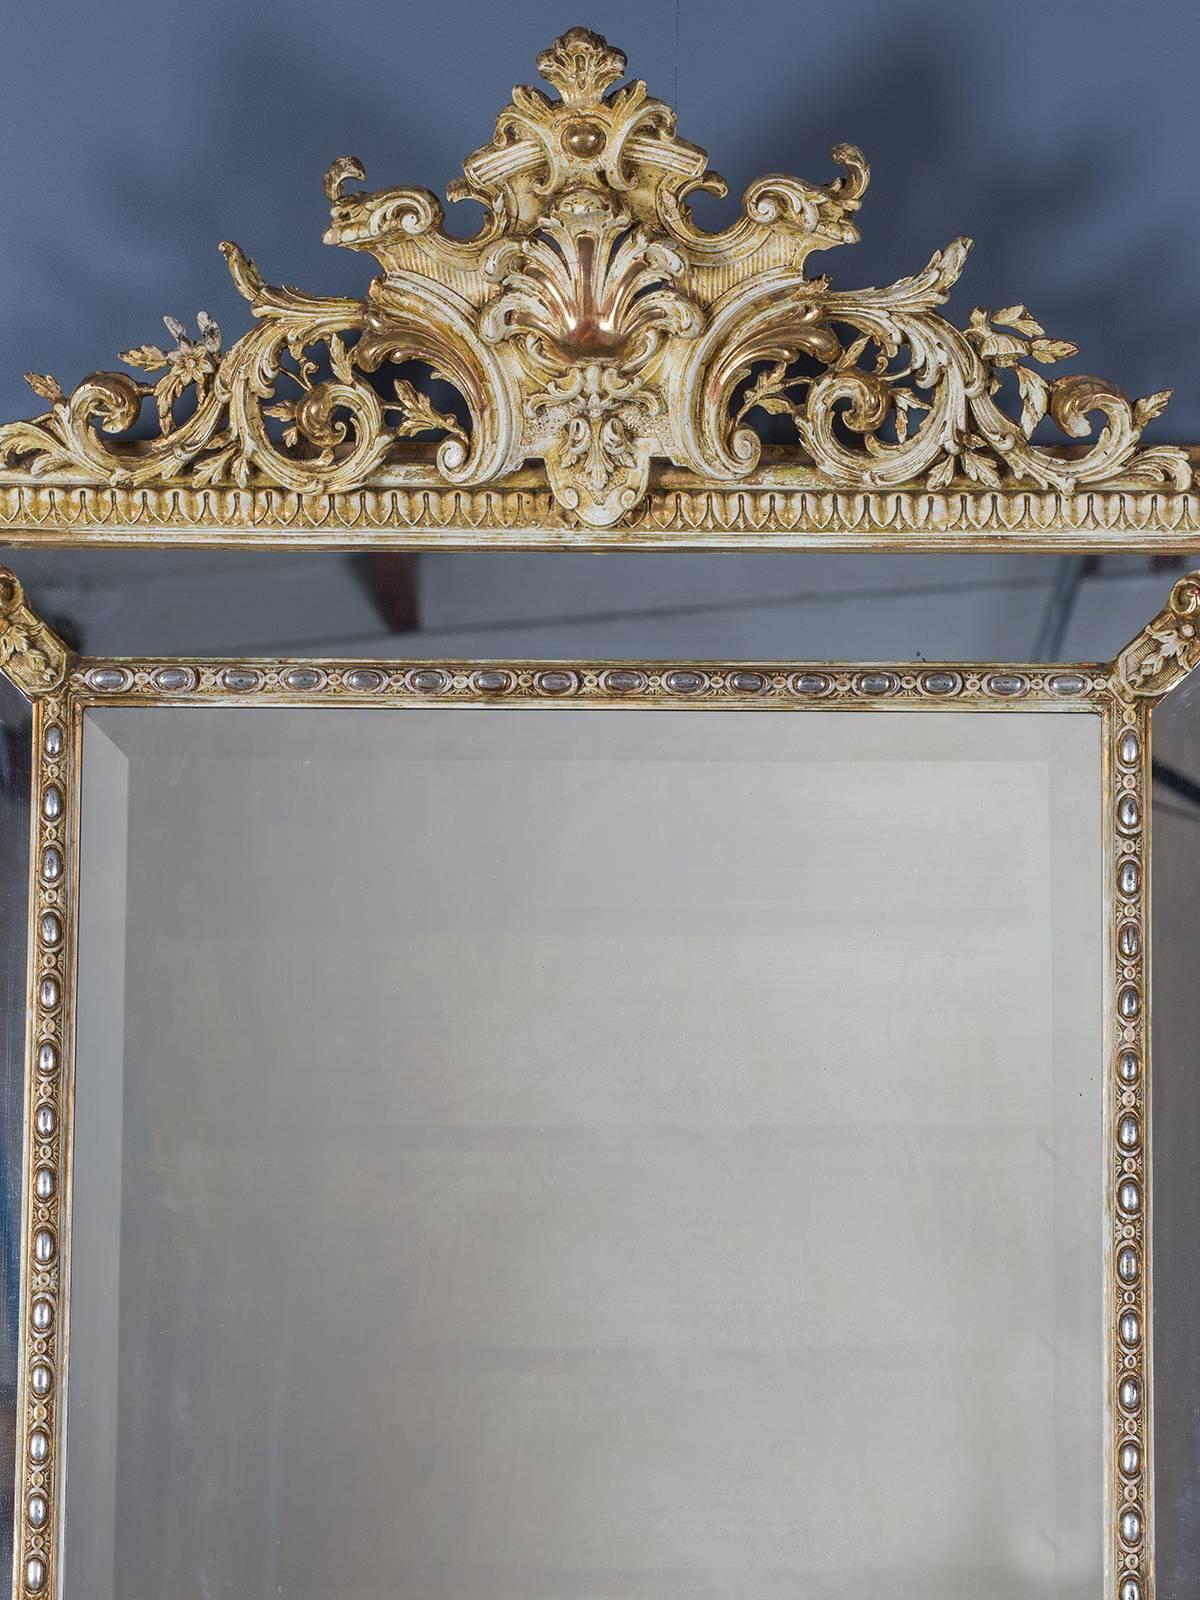 Receive our new selections direct from 1stdibs by email each week. Please click Follow Dealer below and see them first!

The beautiful combination of ivory color, silver and gold leaf and carved details gives this antique French mirror circa 1880